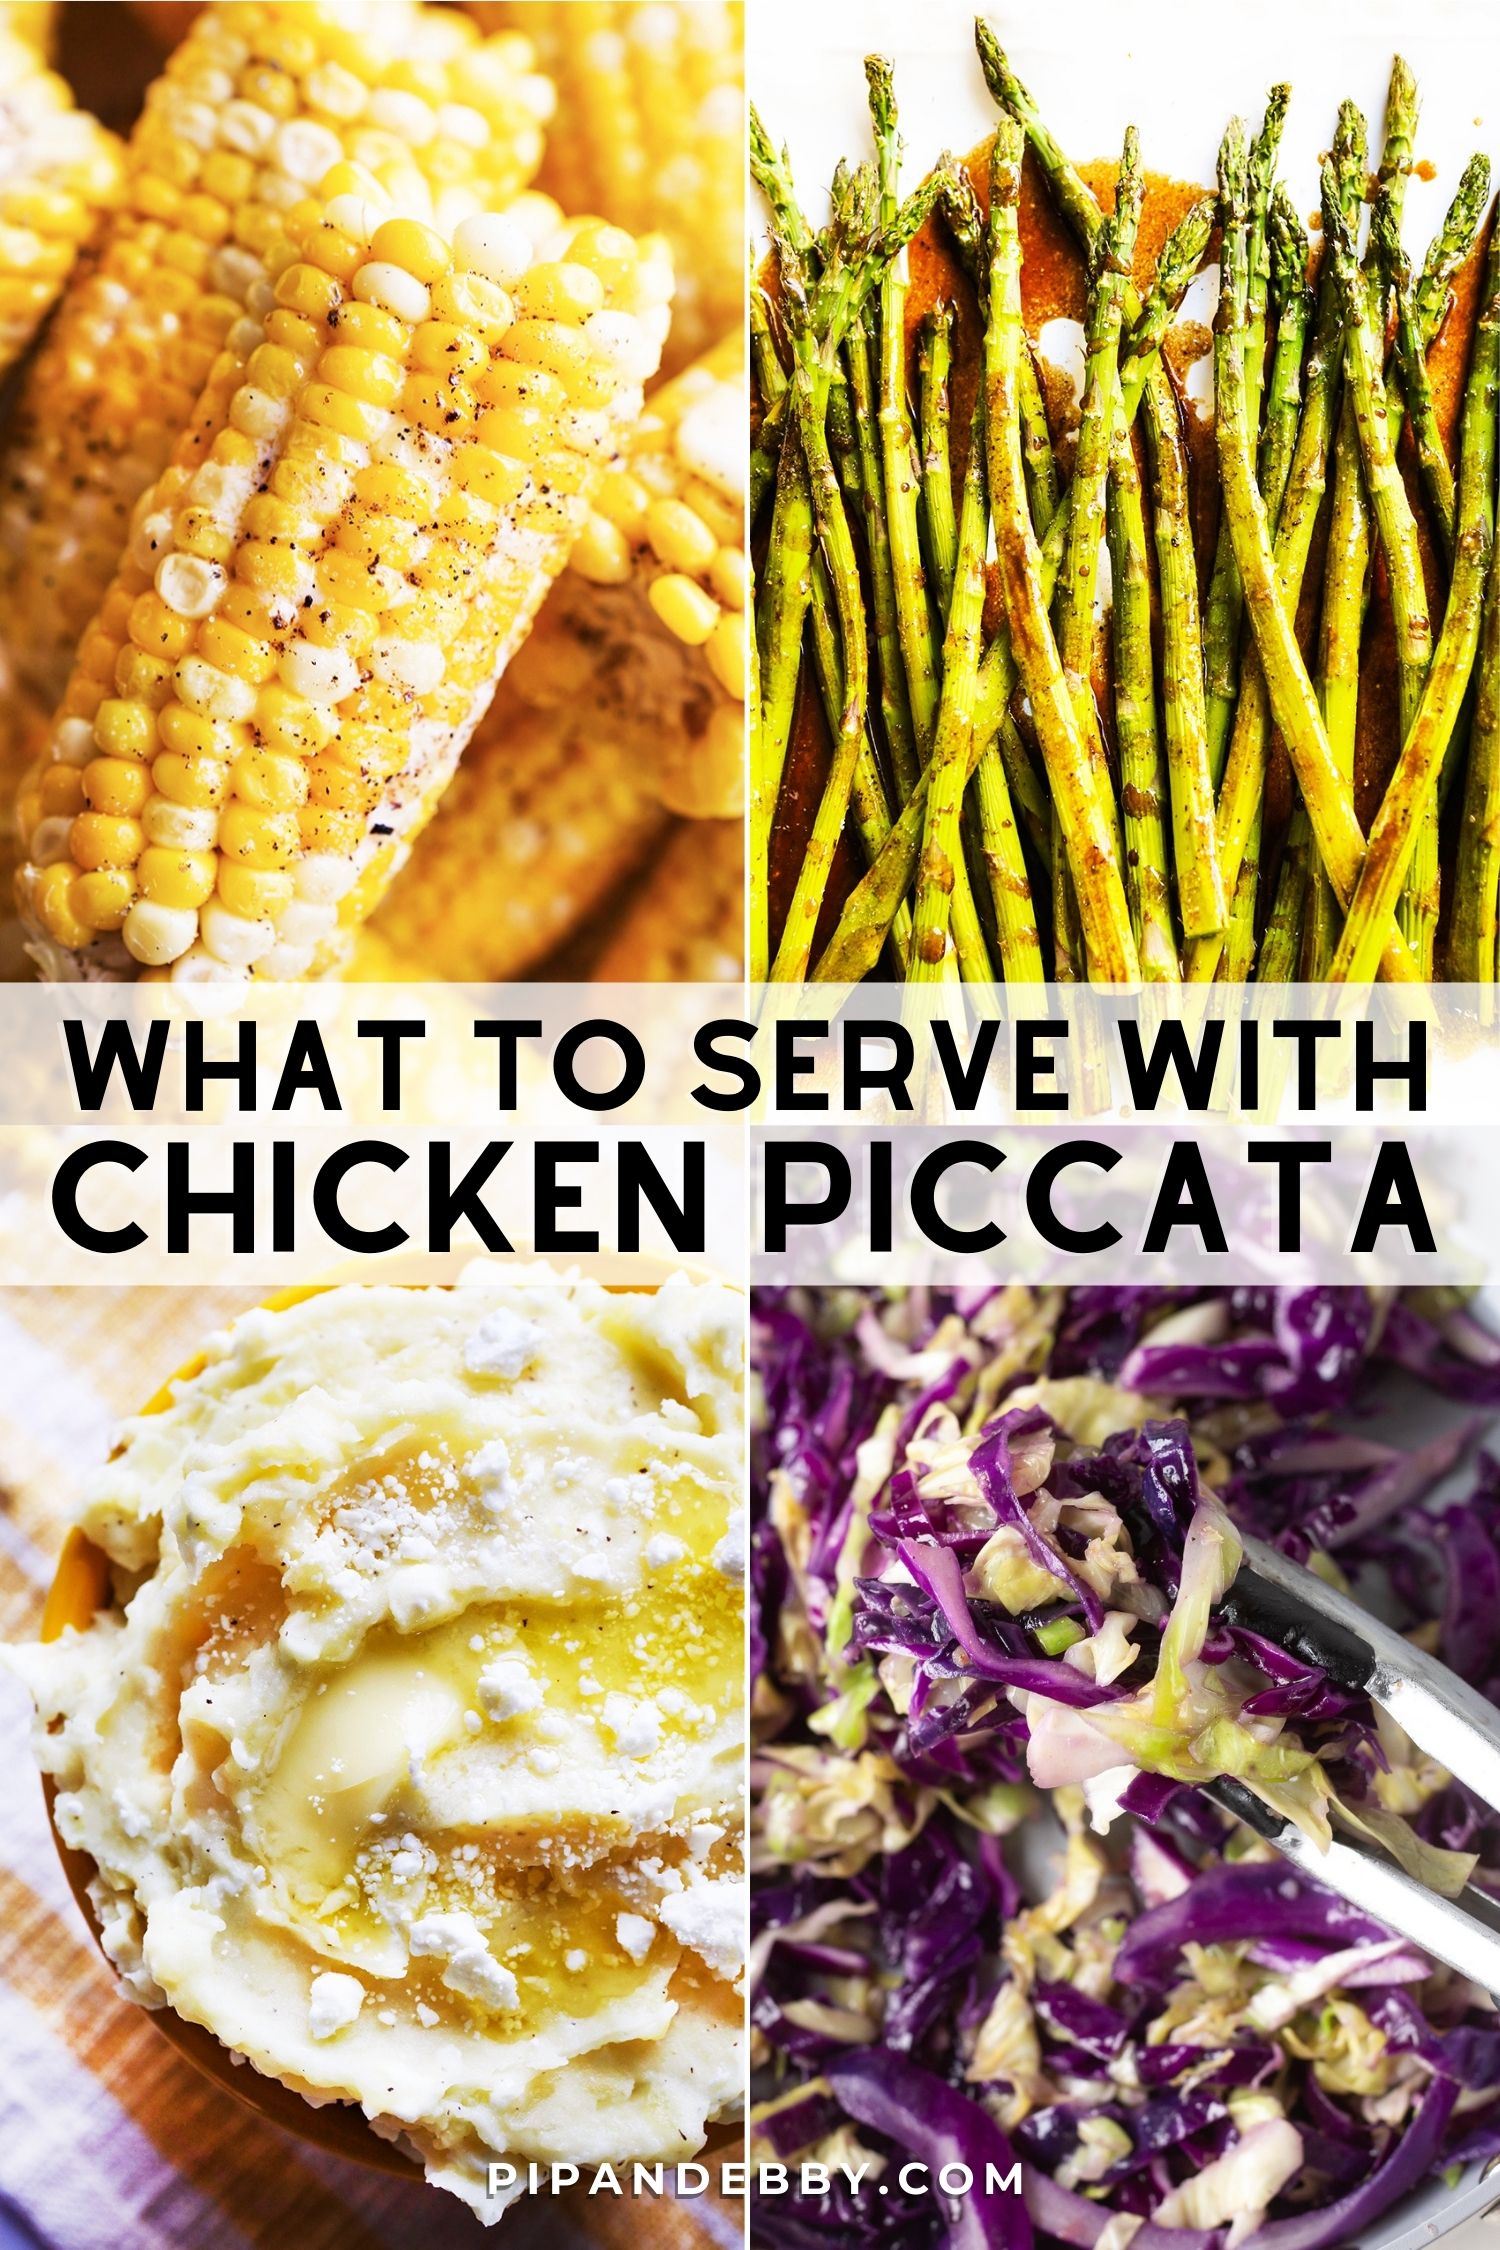 Four food photos in a grid with text overlay reading, "What to serve with chicken piccata."